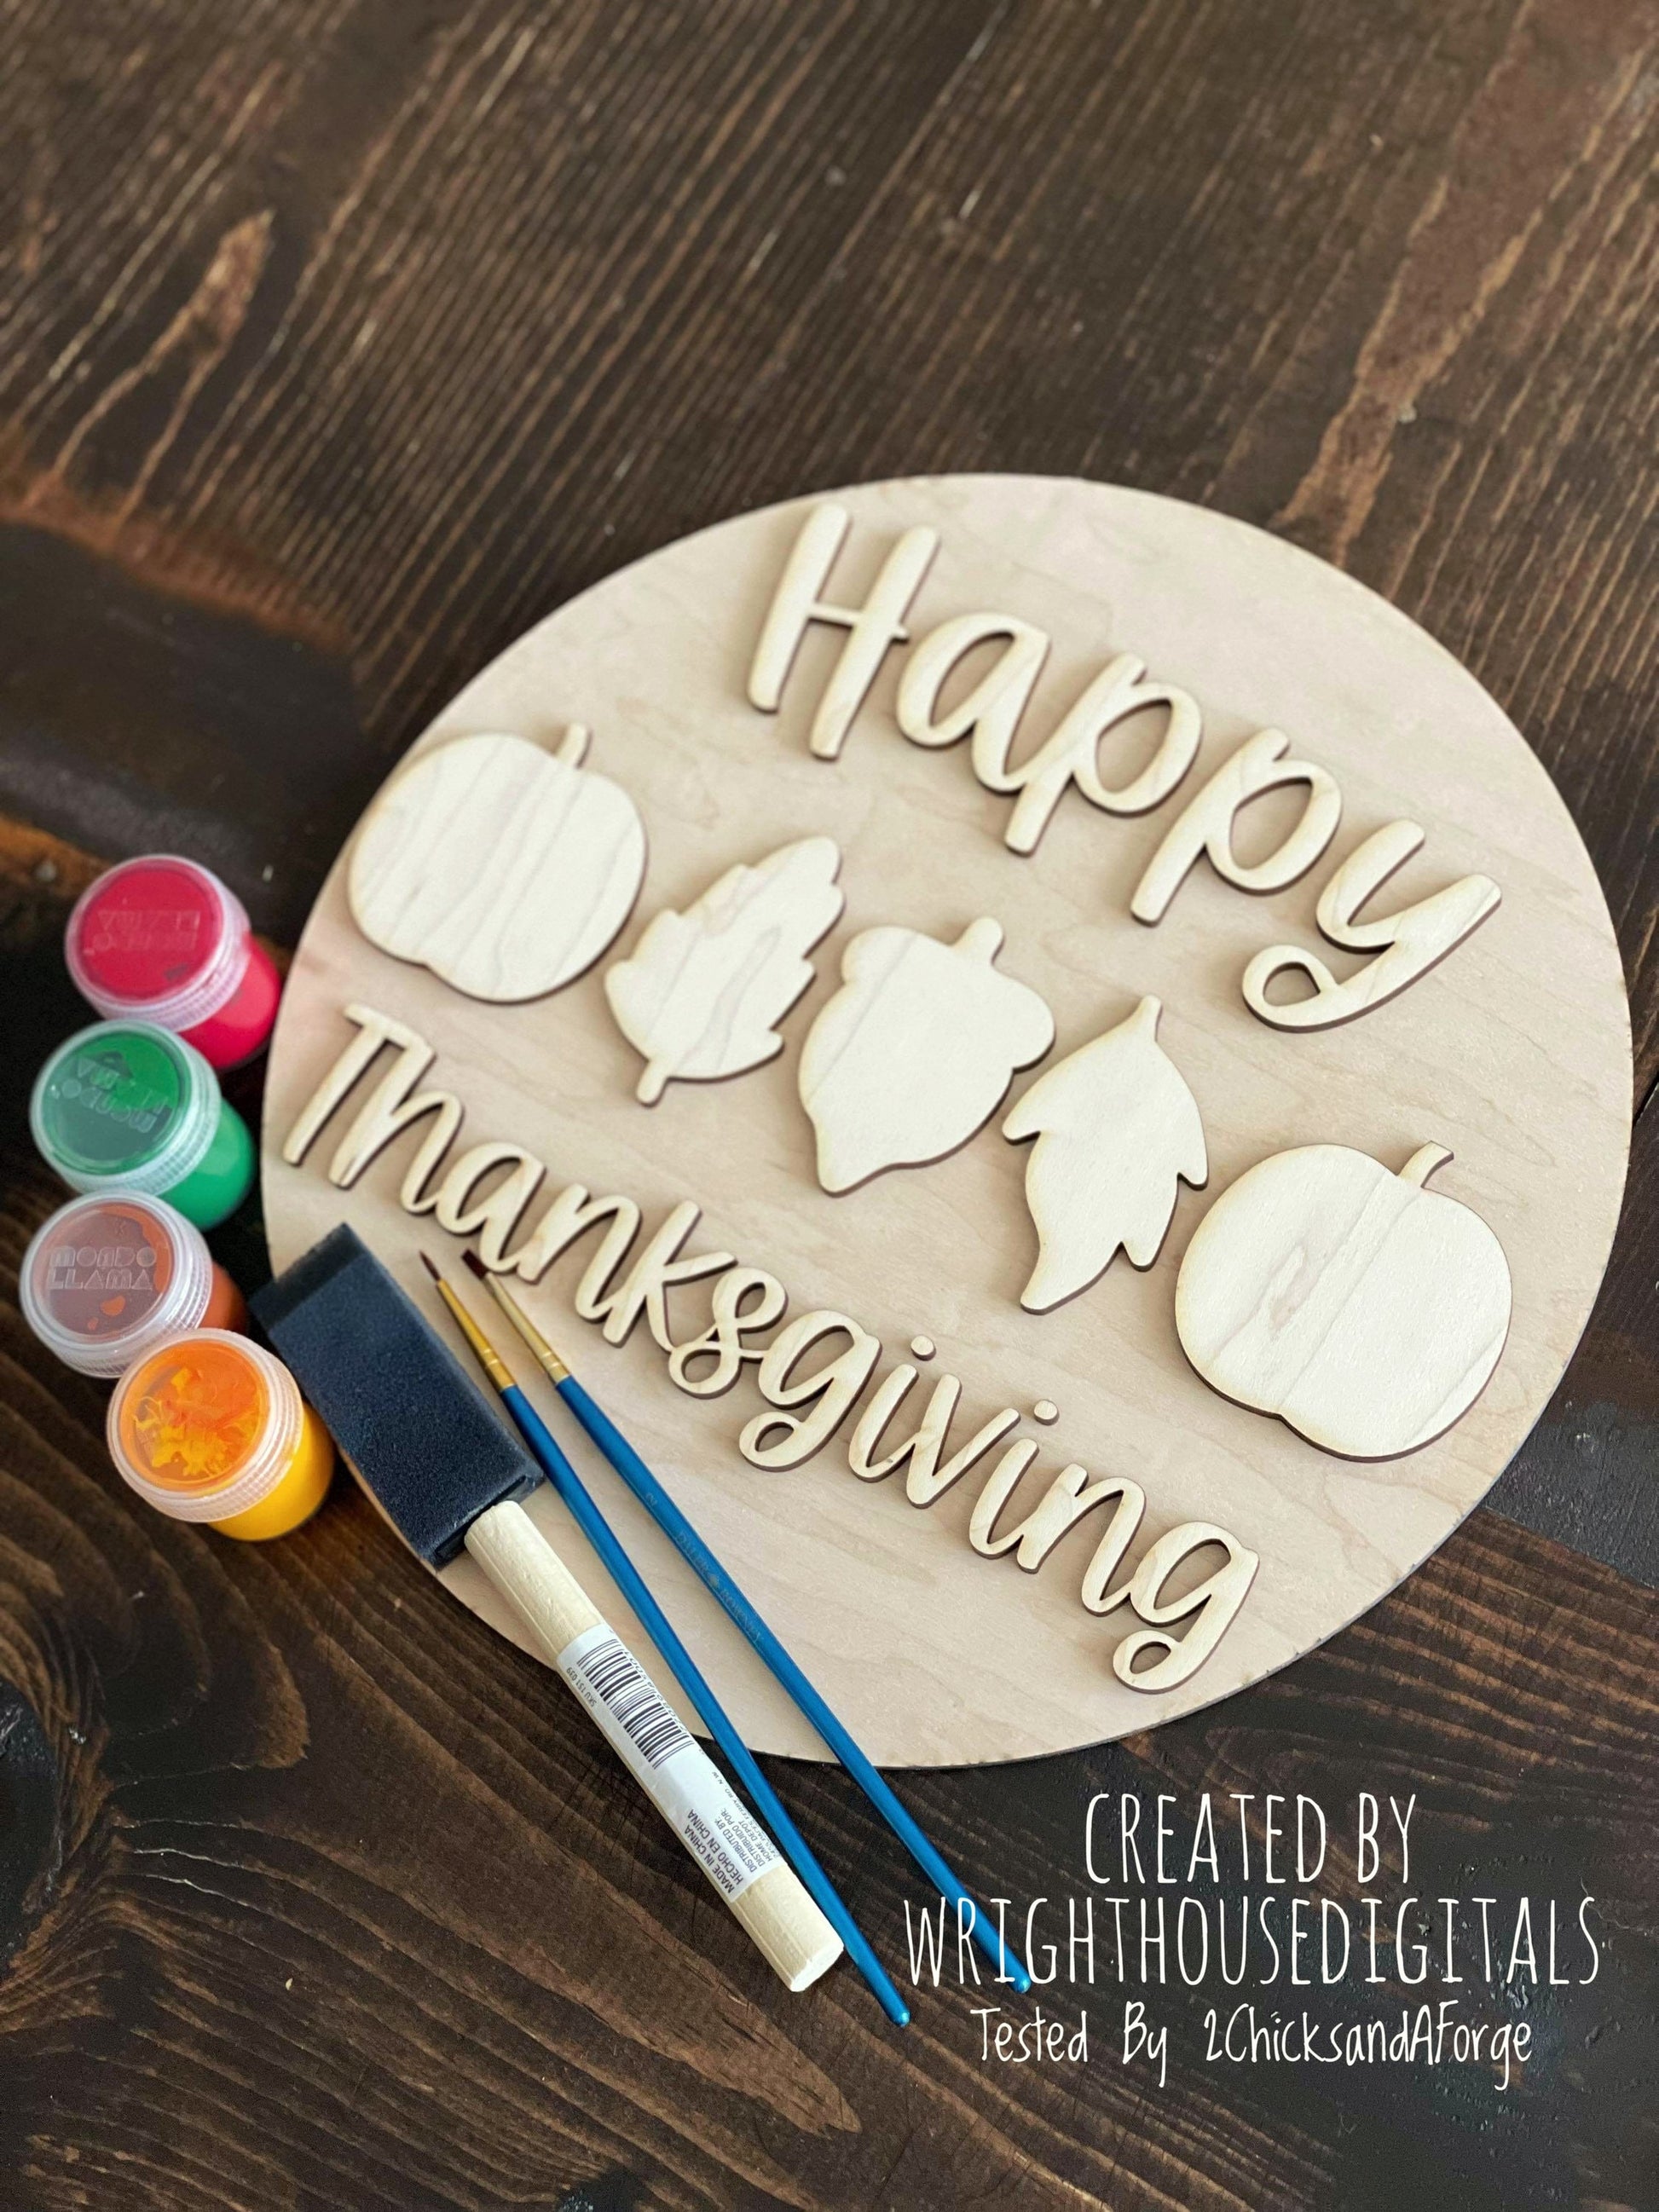 Happy and Blessed Thanksgiving Pumpkin Round Bundle - Seasonal Sign Making and DIY Kits - Cut File For Glowforge Laser - Digital SVG File